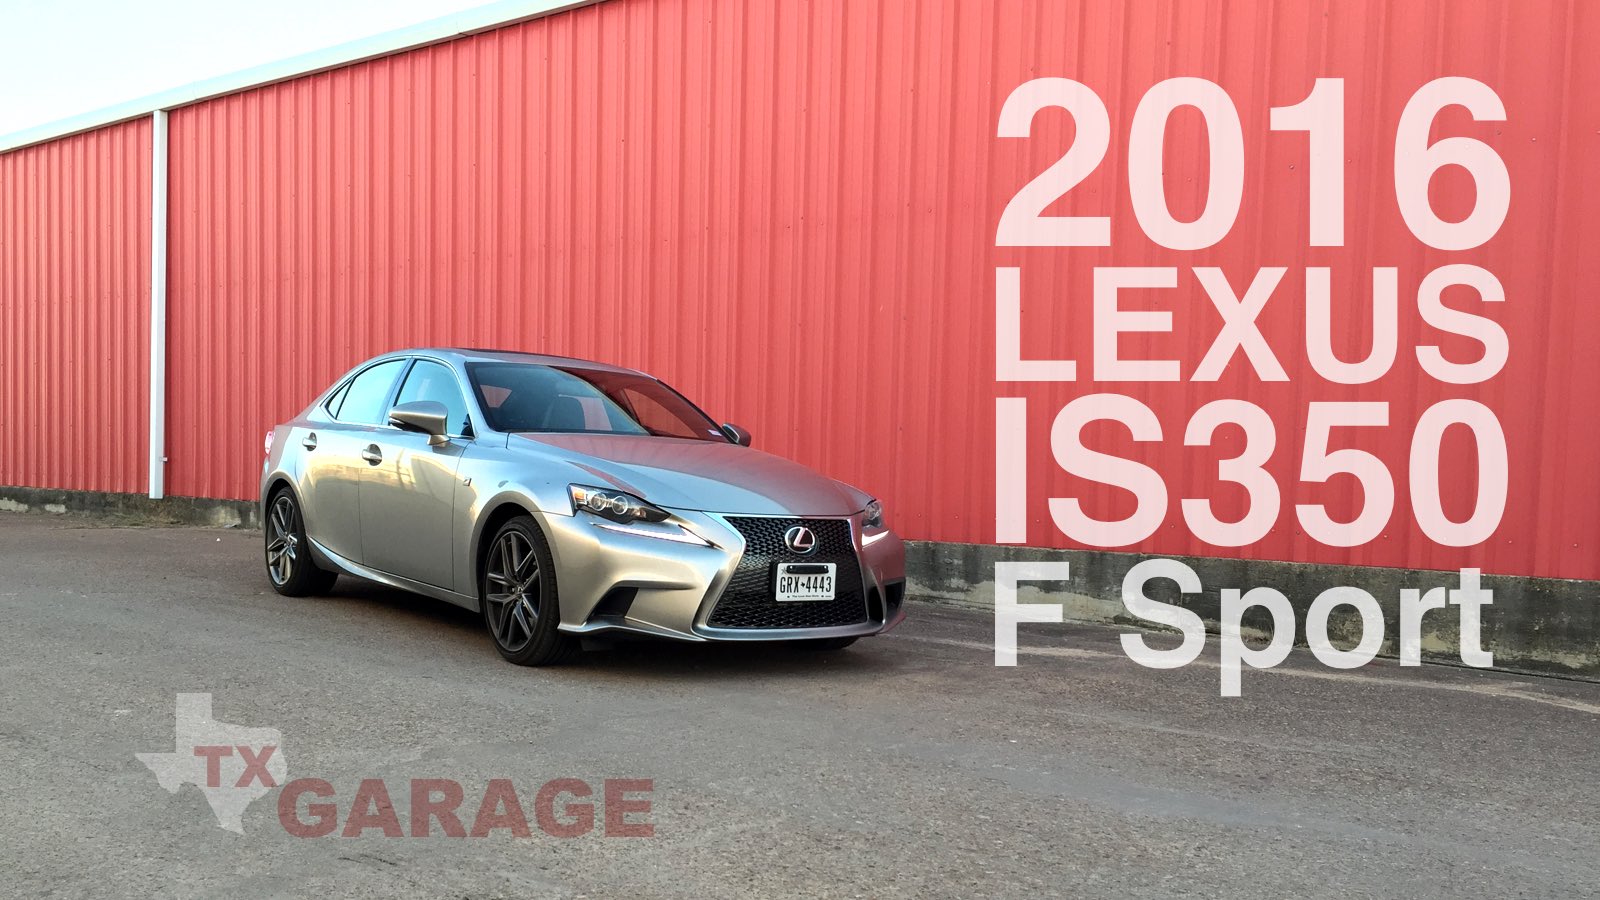 The 2016 Lexus IS350 F Sport by txGarage